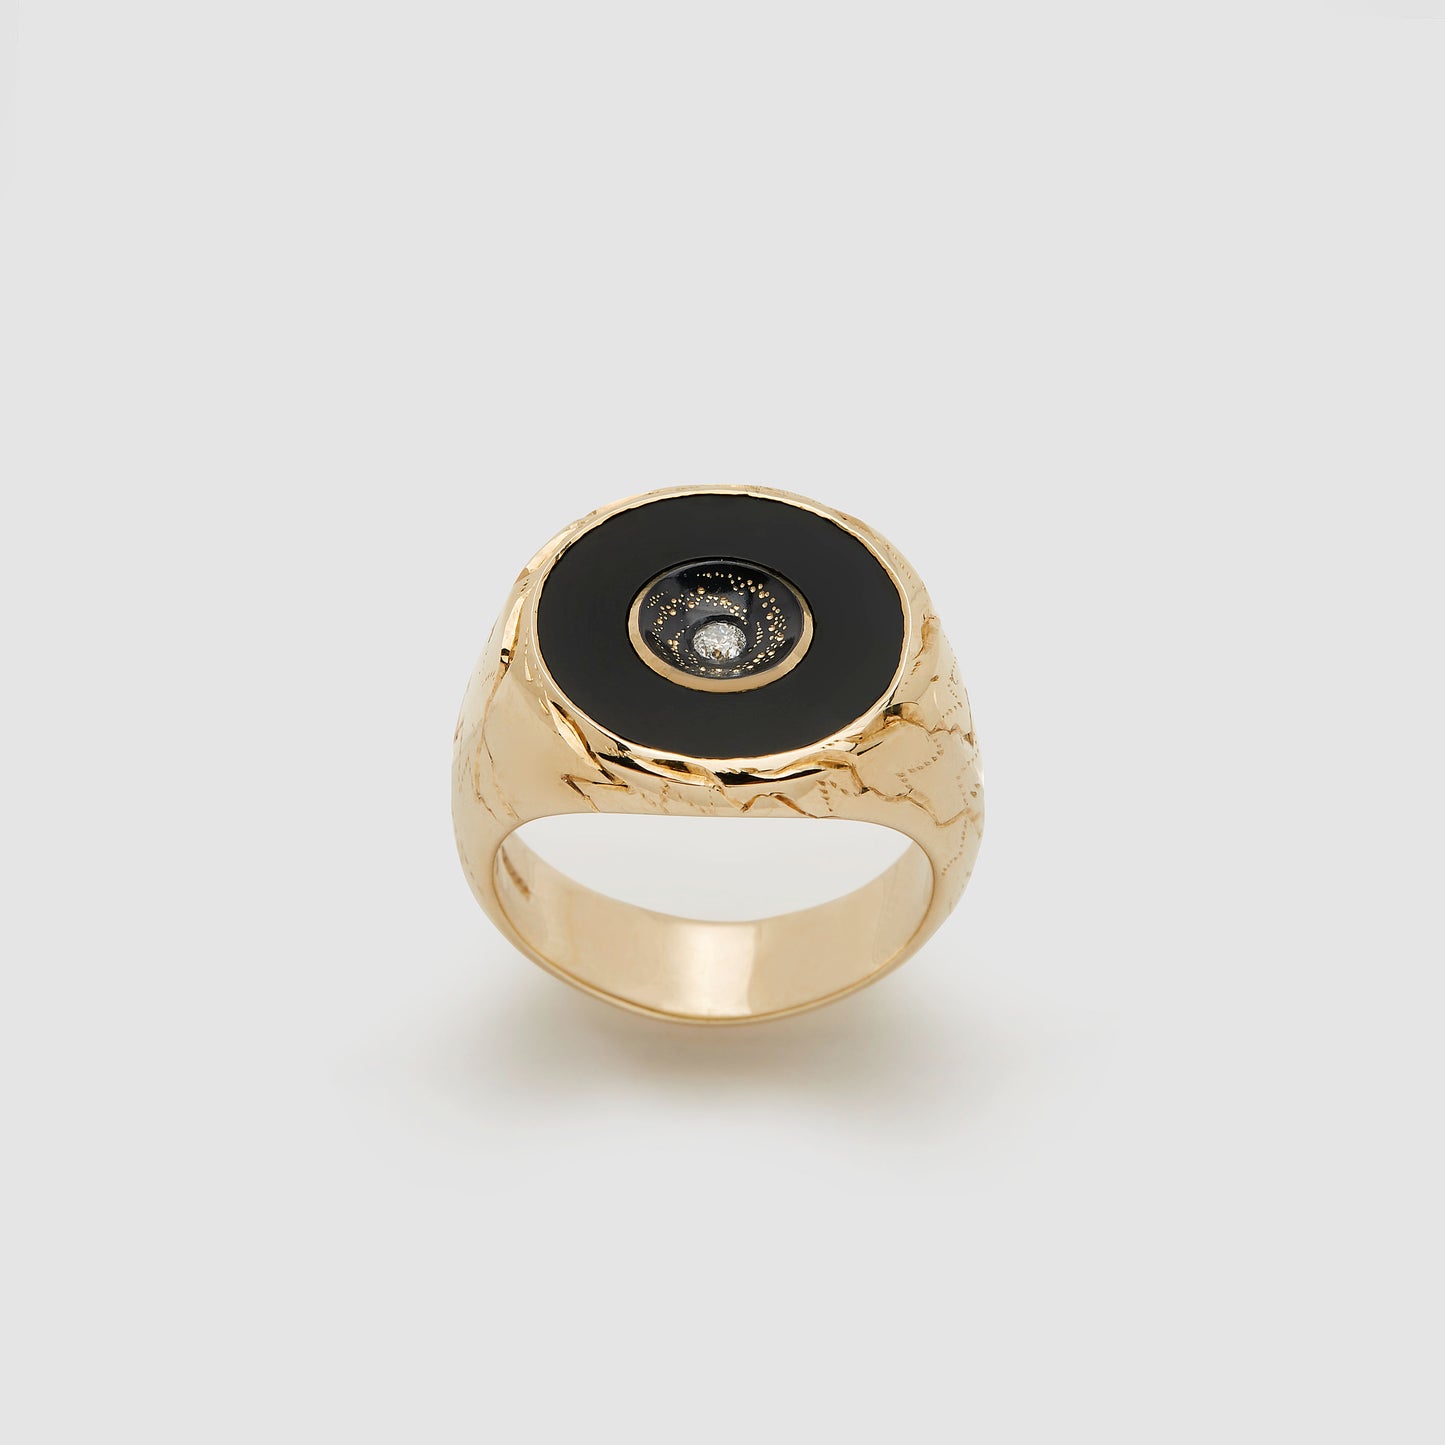 Castro Smith Jewelry Gold Oubliette Signet Ring.